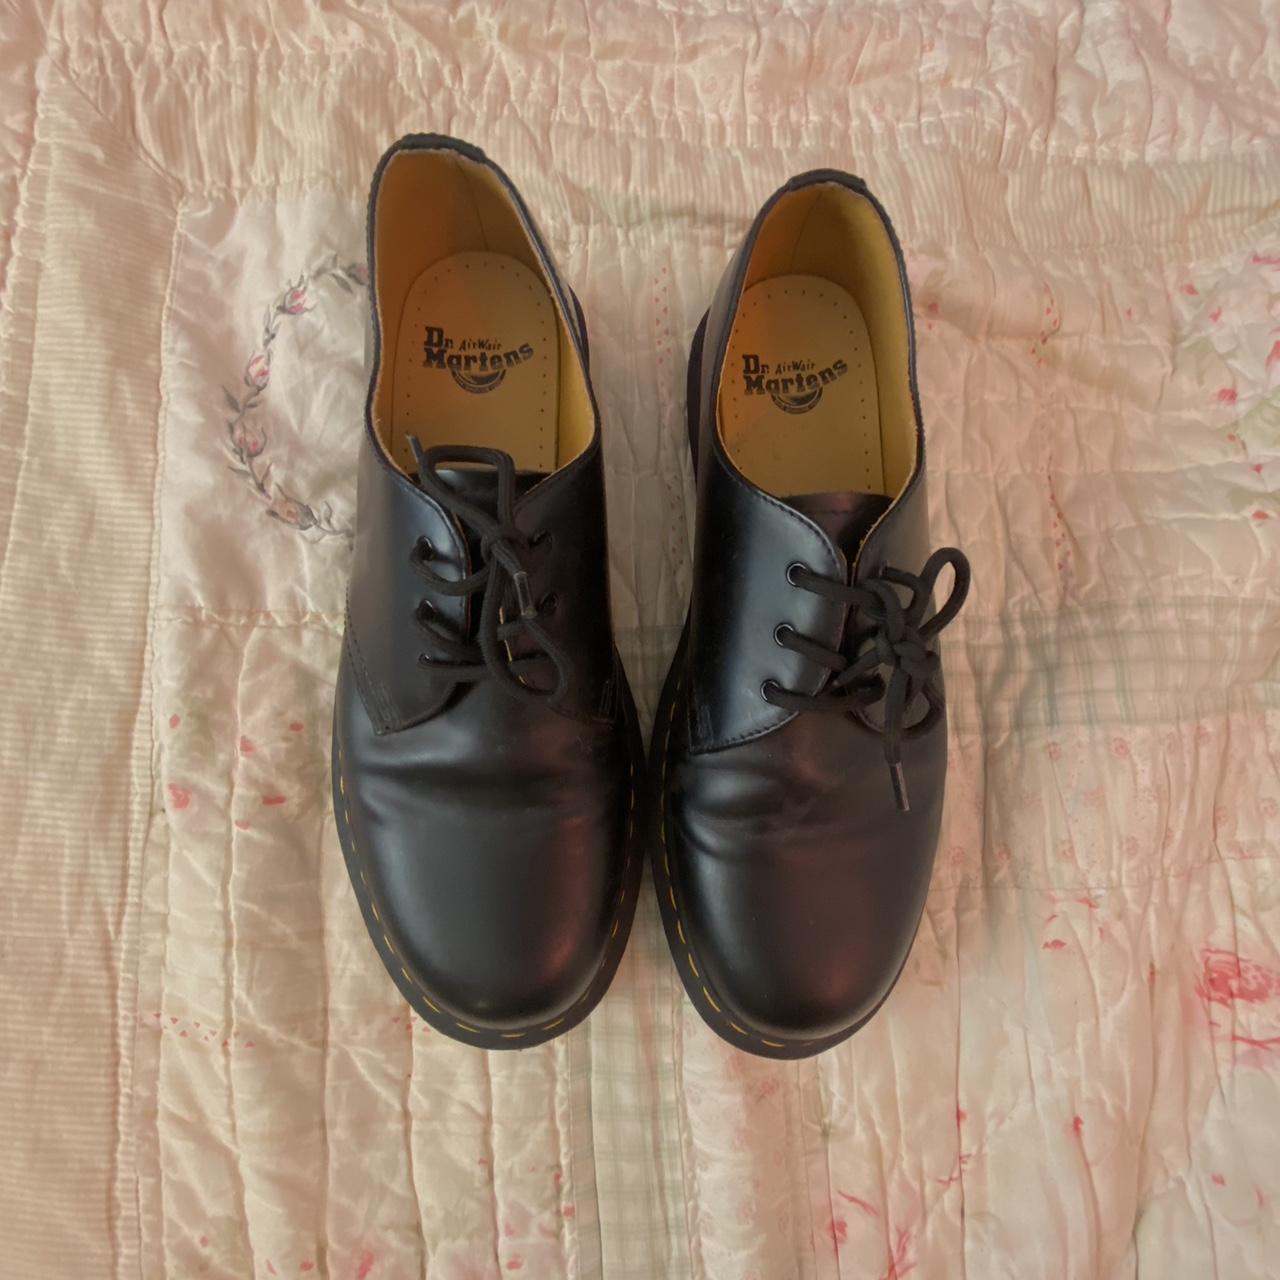 1461 SMOOTH LEATHER OXFORD SHOES BRAND NEW NO... - Depop